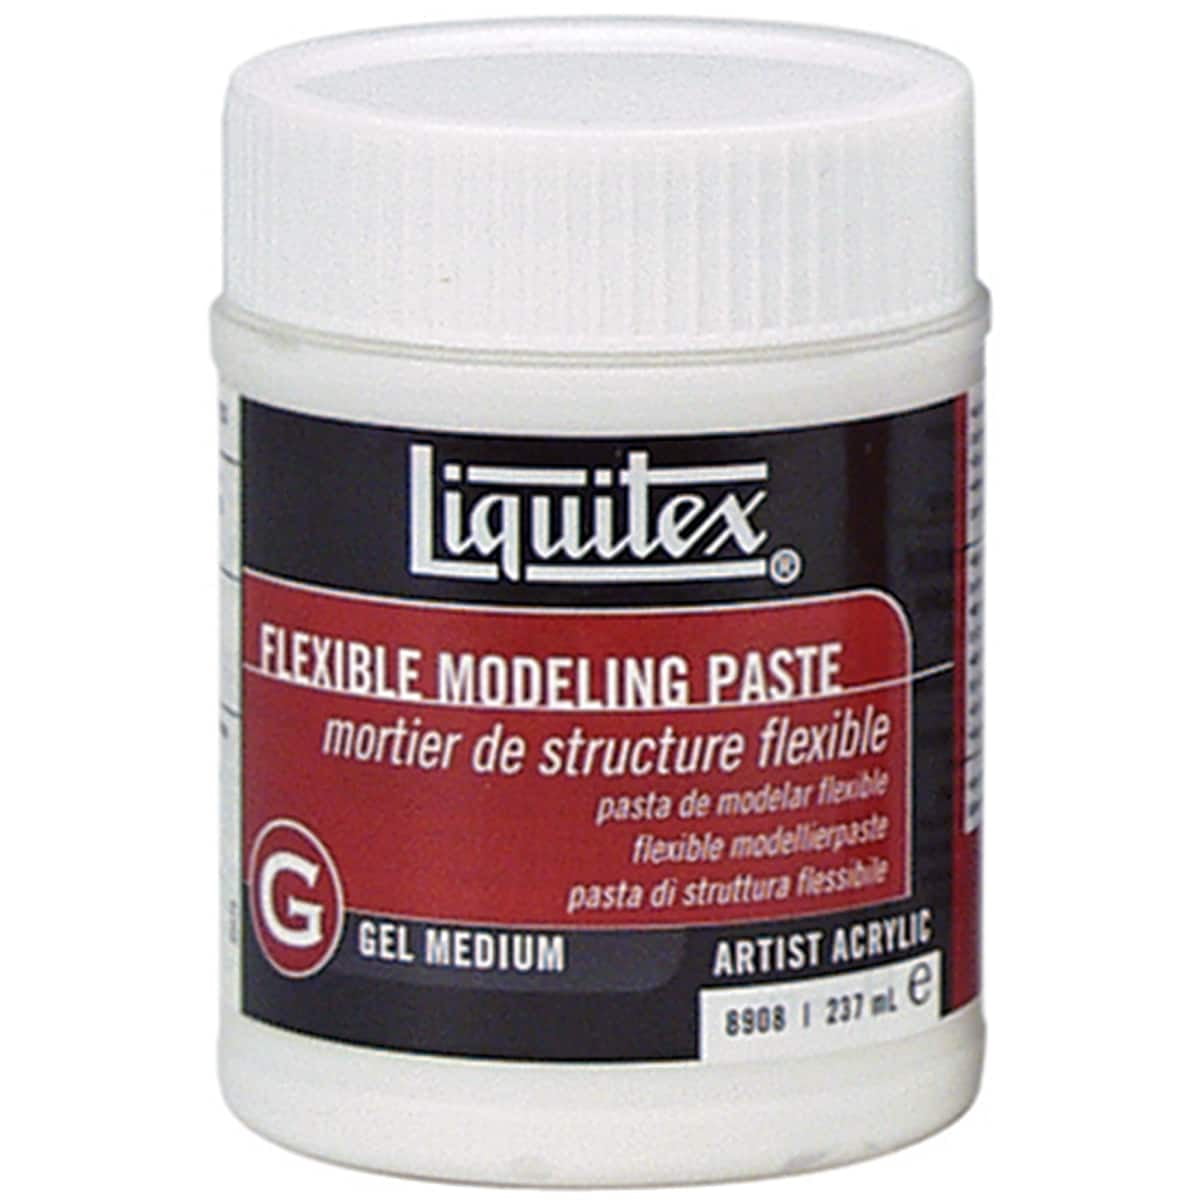 Using liquitex to finish 3D prints  Can modeling paste smooth 3D prints?  Liquitex review & tutorial 